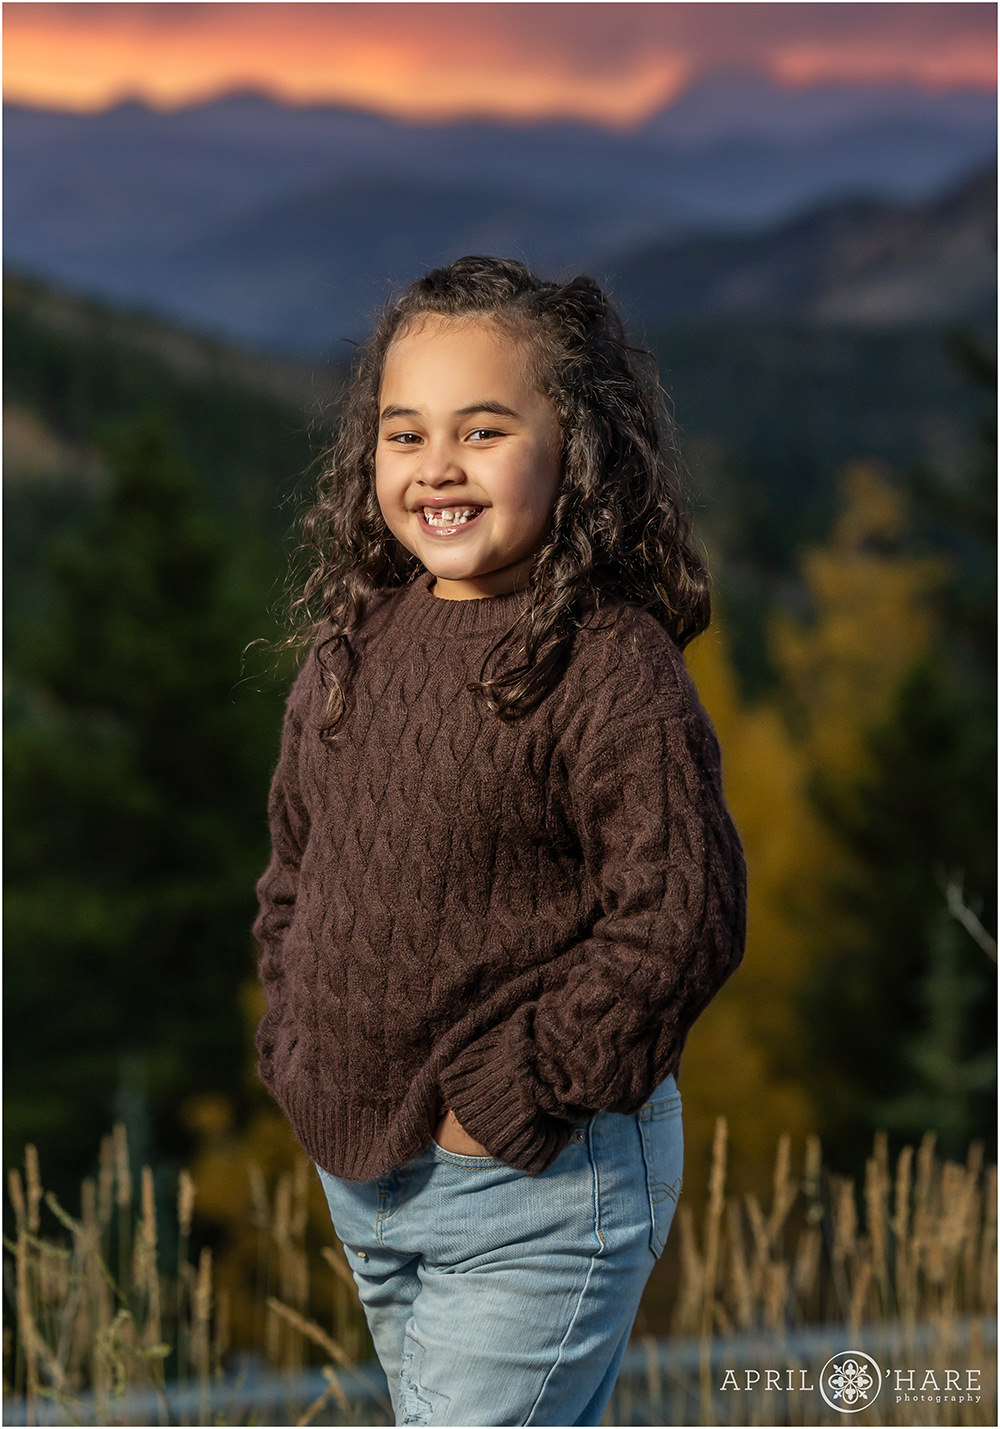 Cute girl wearing a brown sweater at sunset with a mountain backdrop on Squaw Pass Road in Evergreen CO